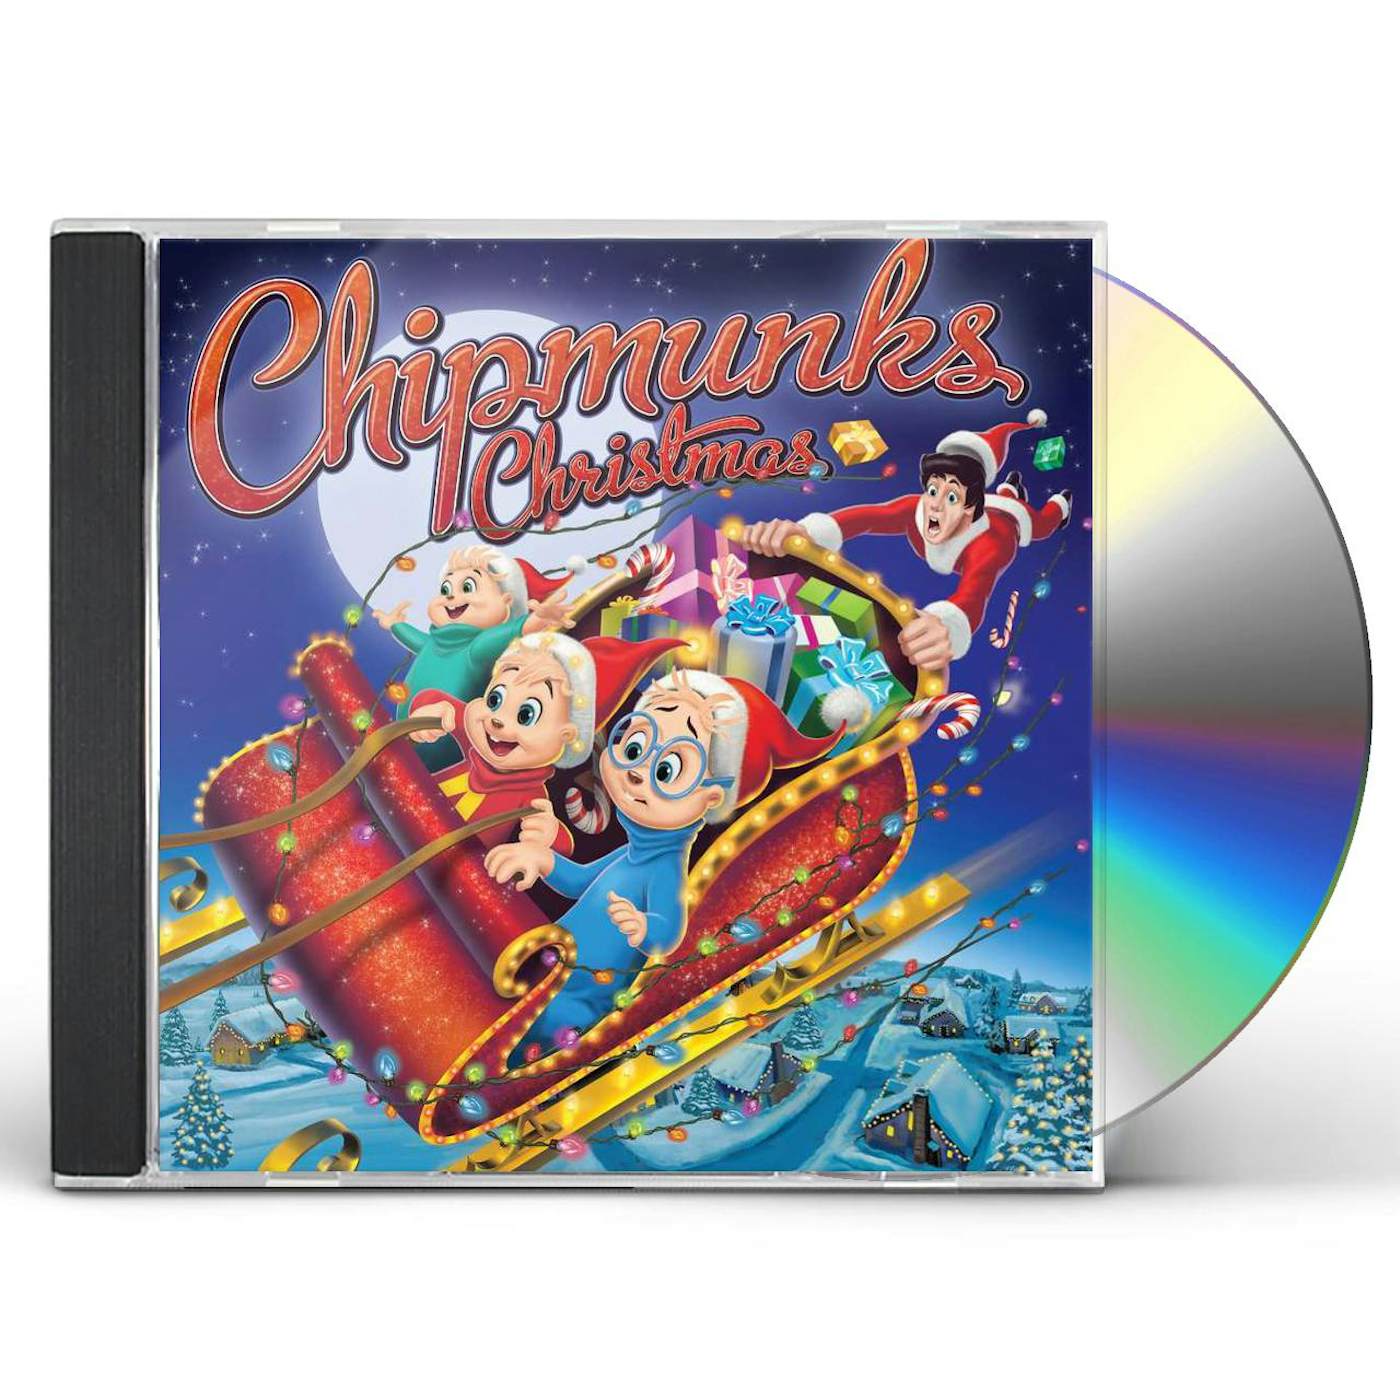 Alvin and the Chipmunks Christmas CD